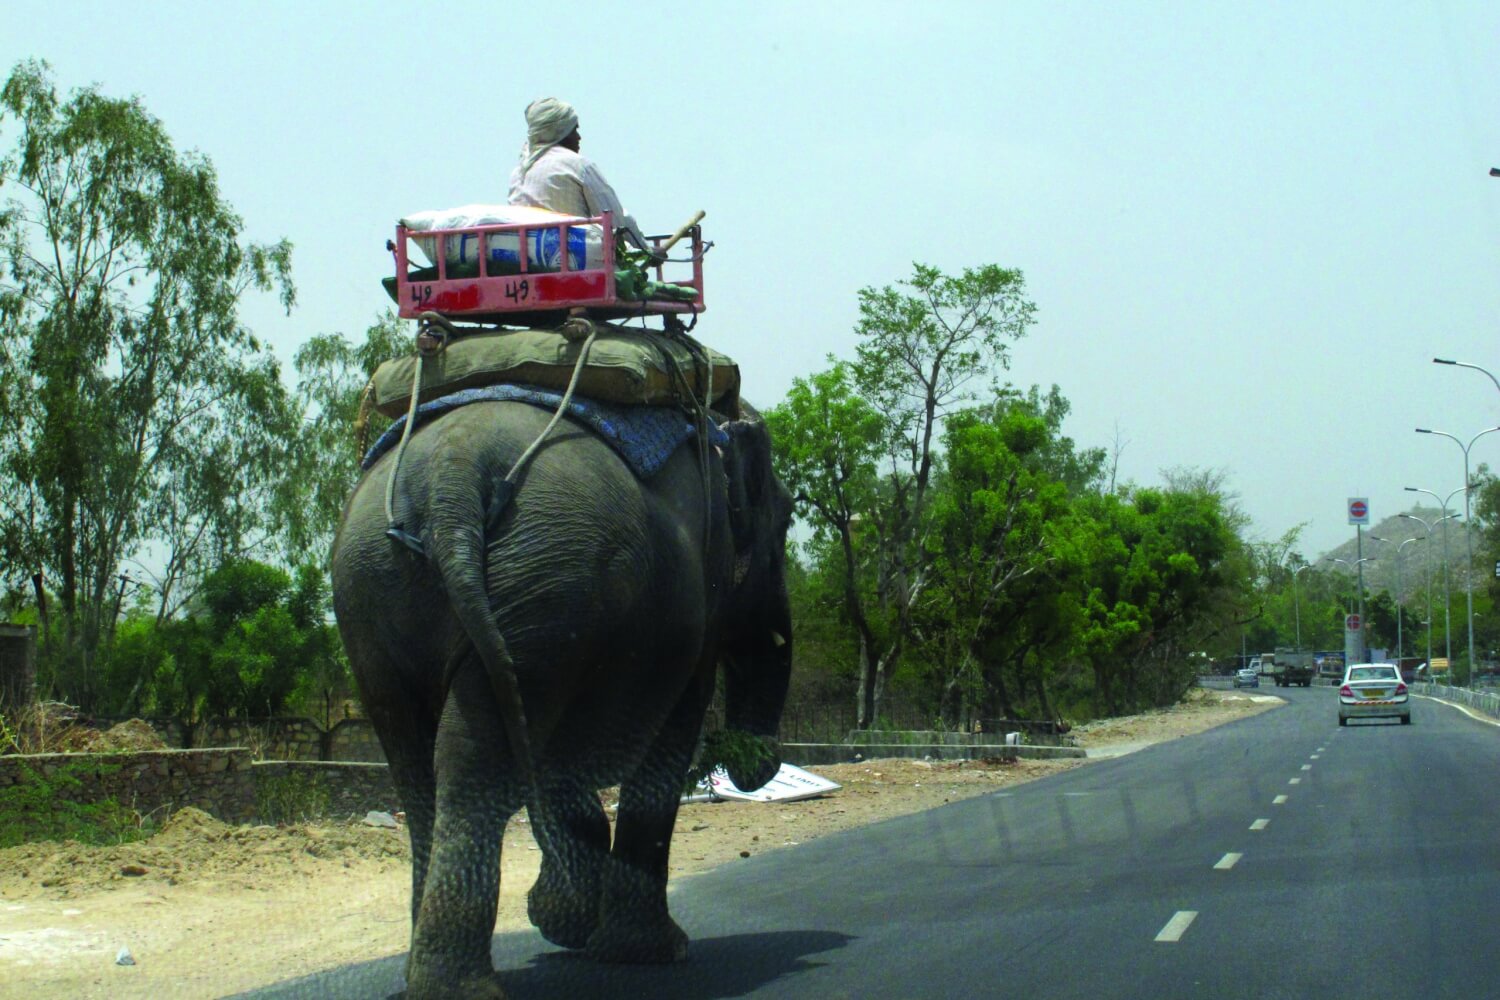 Plenty of room on top! Never be surprised by the other road users on the Delhi Jaipur highway the NH48, a major trunk road. Photo – Aripstra via Wikimedia Commons